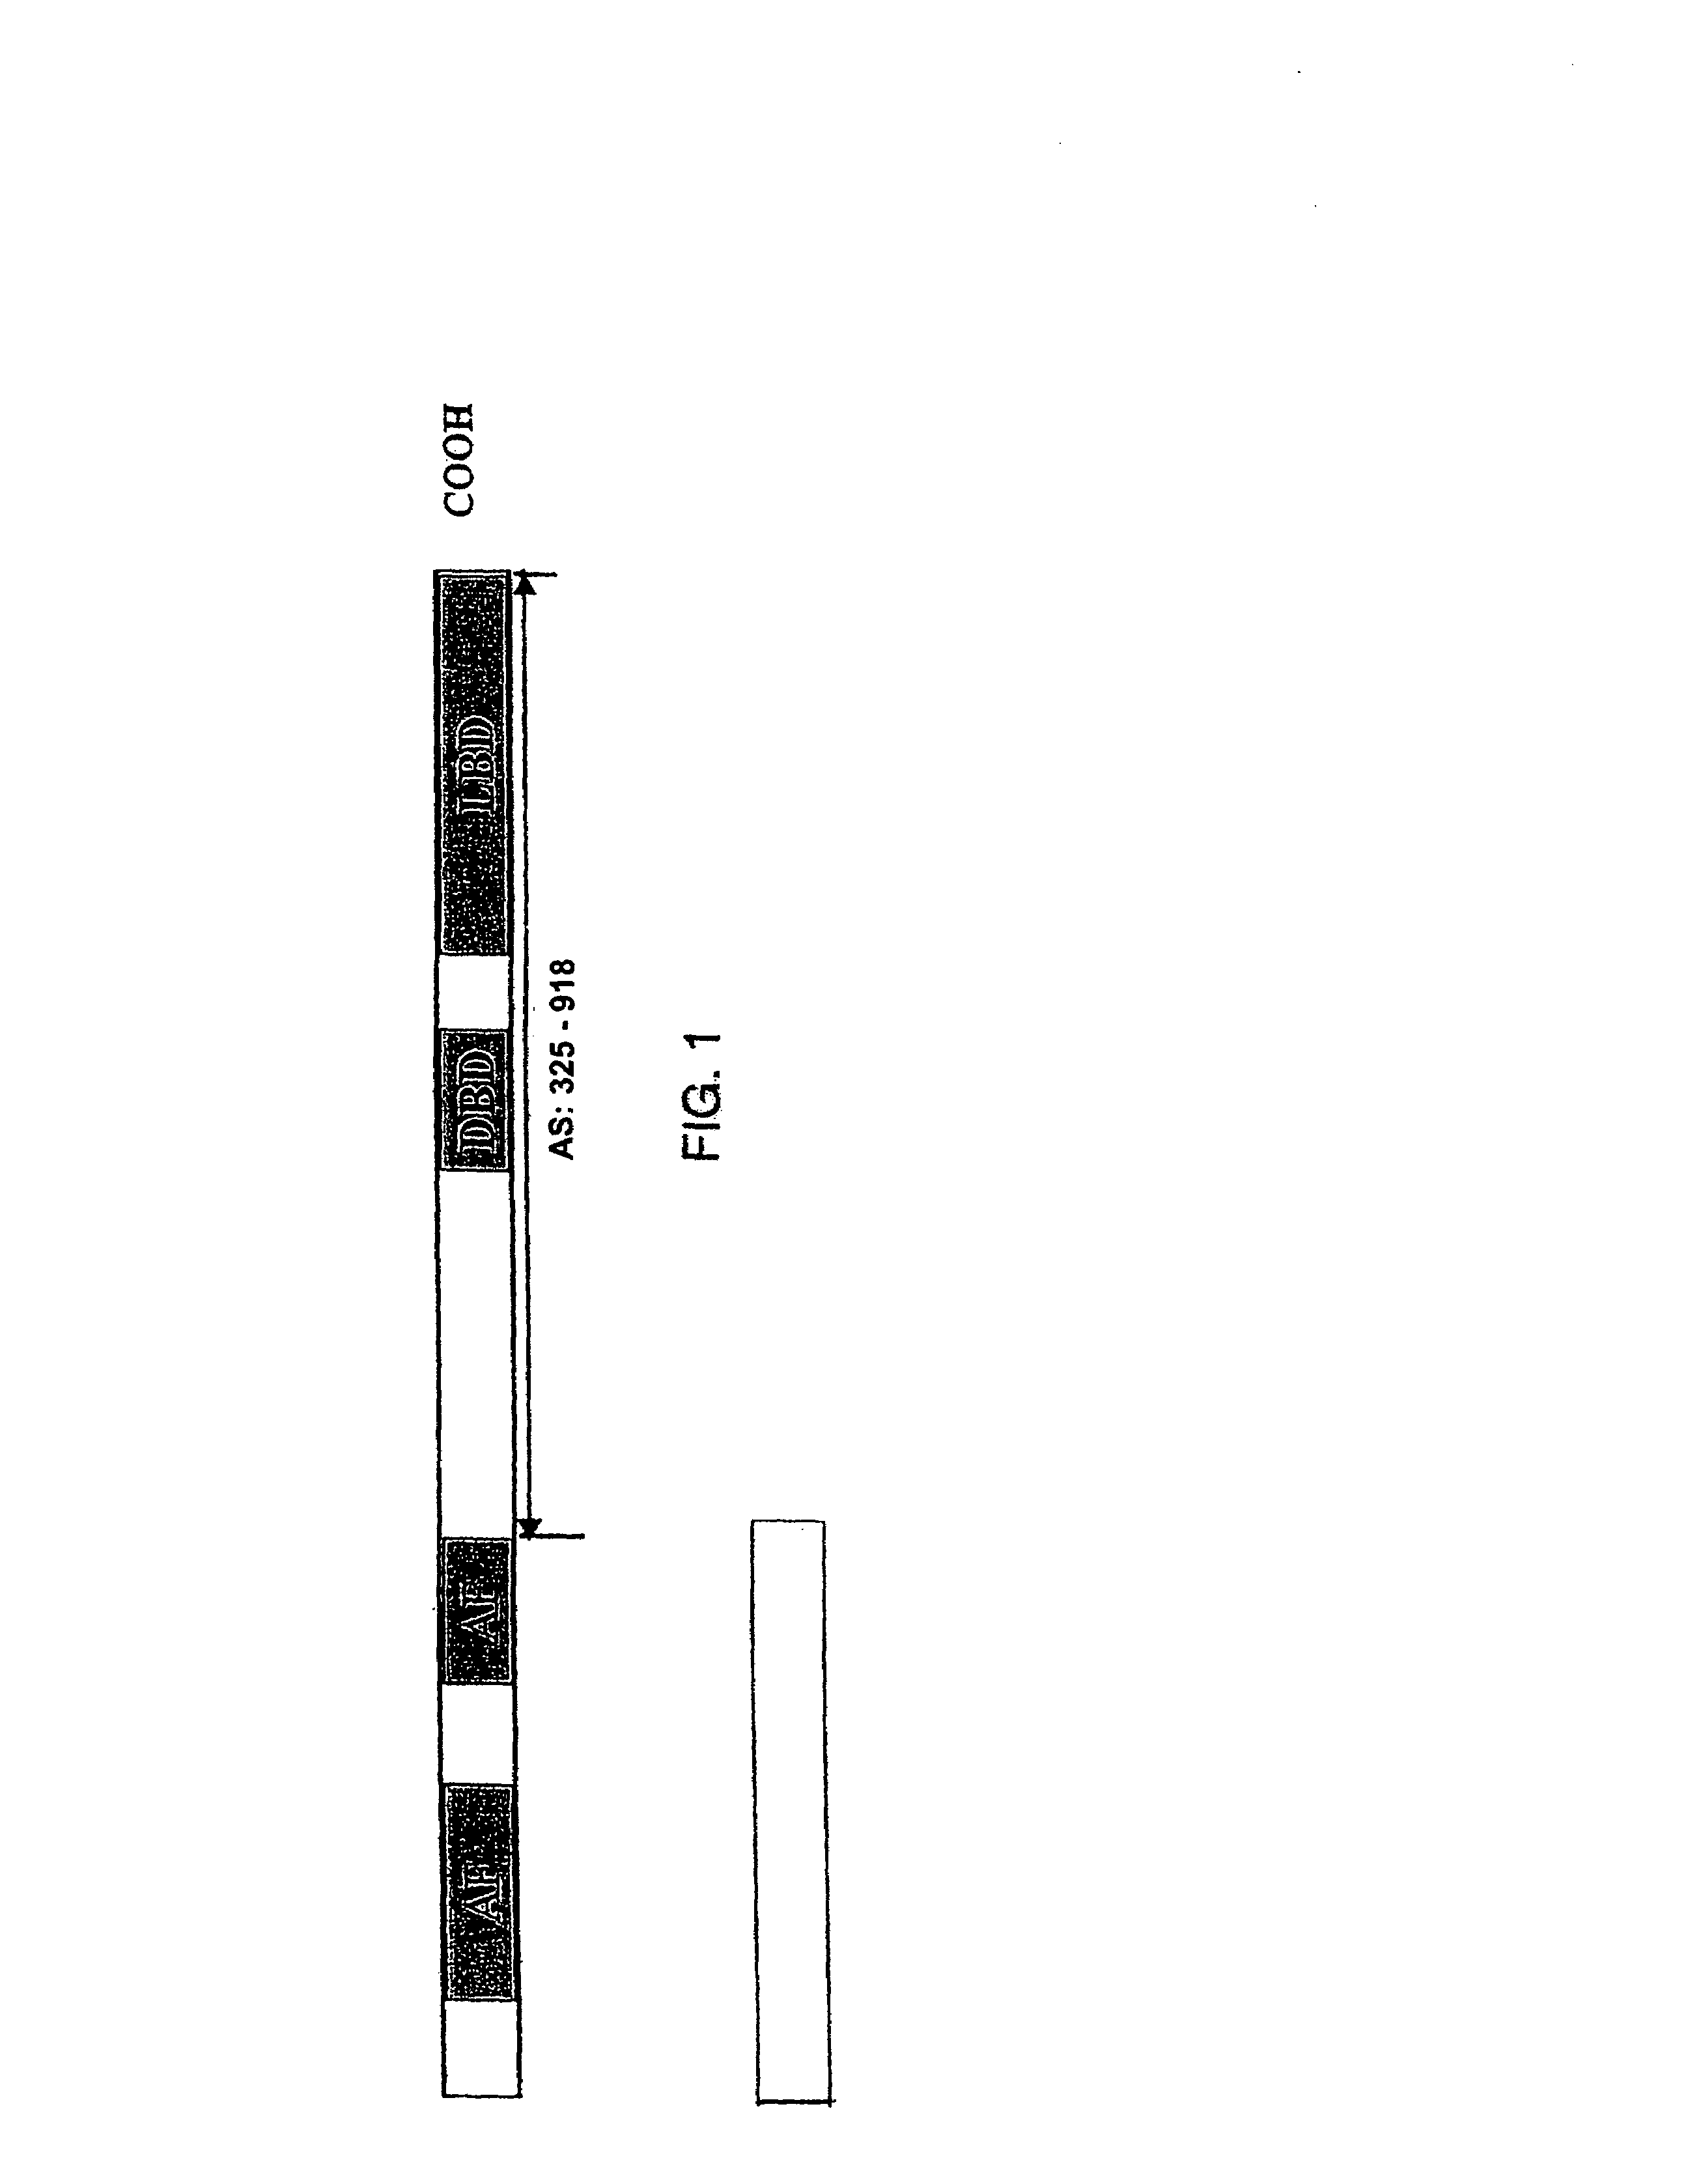 Methods for determining hormonal effects of substances using Ewing sarcoma protein and androgen receptor